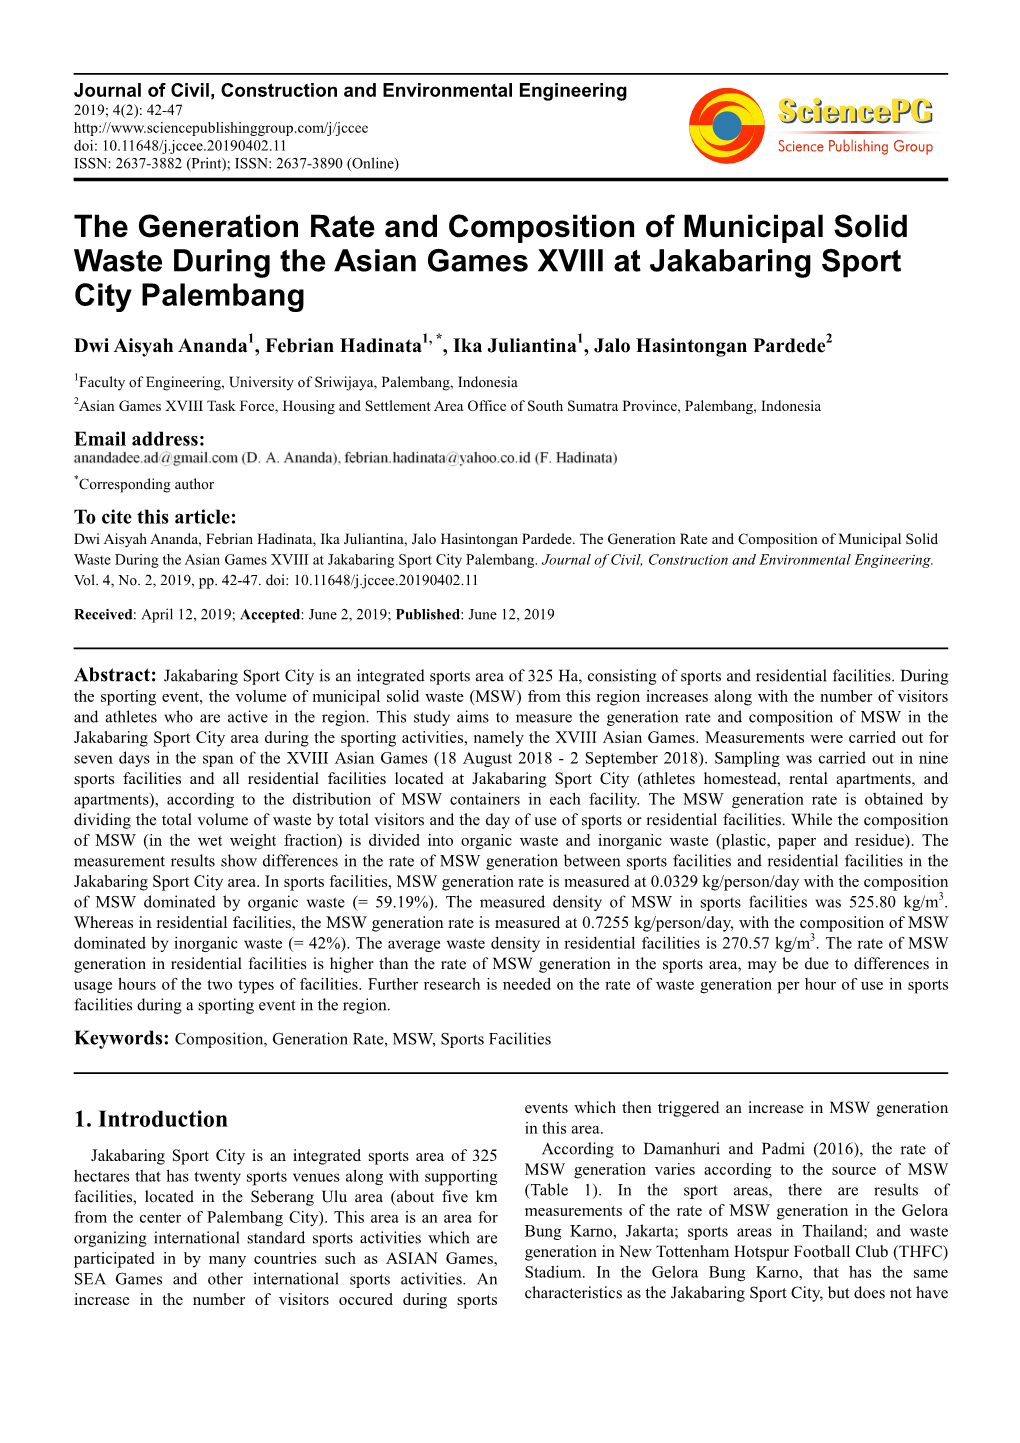 The Generation Rate and Composition of Municipal Solid Waste During the Asian Games XVIII at Jakabaring Sport City Palembang